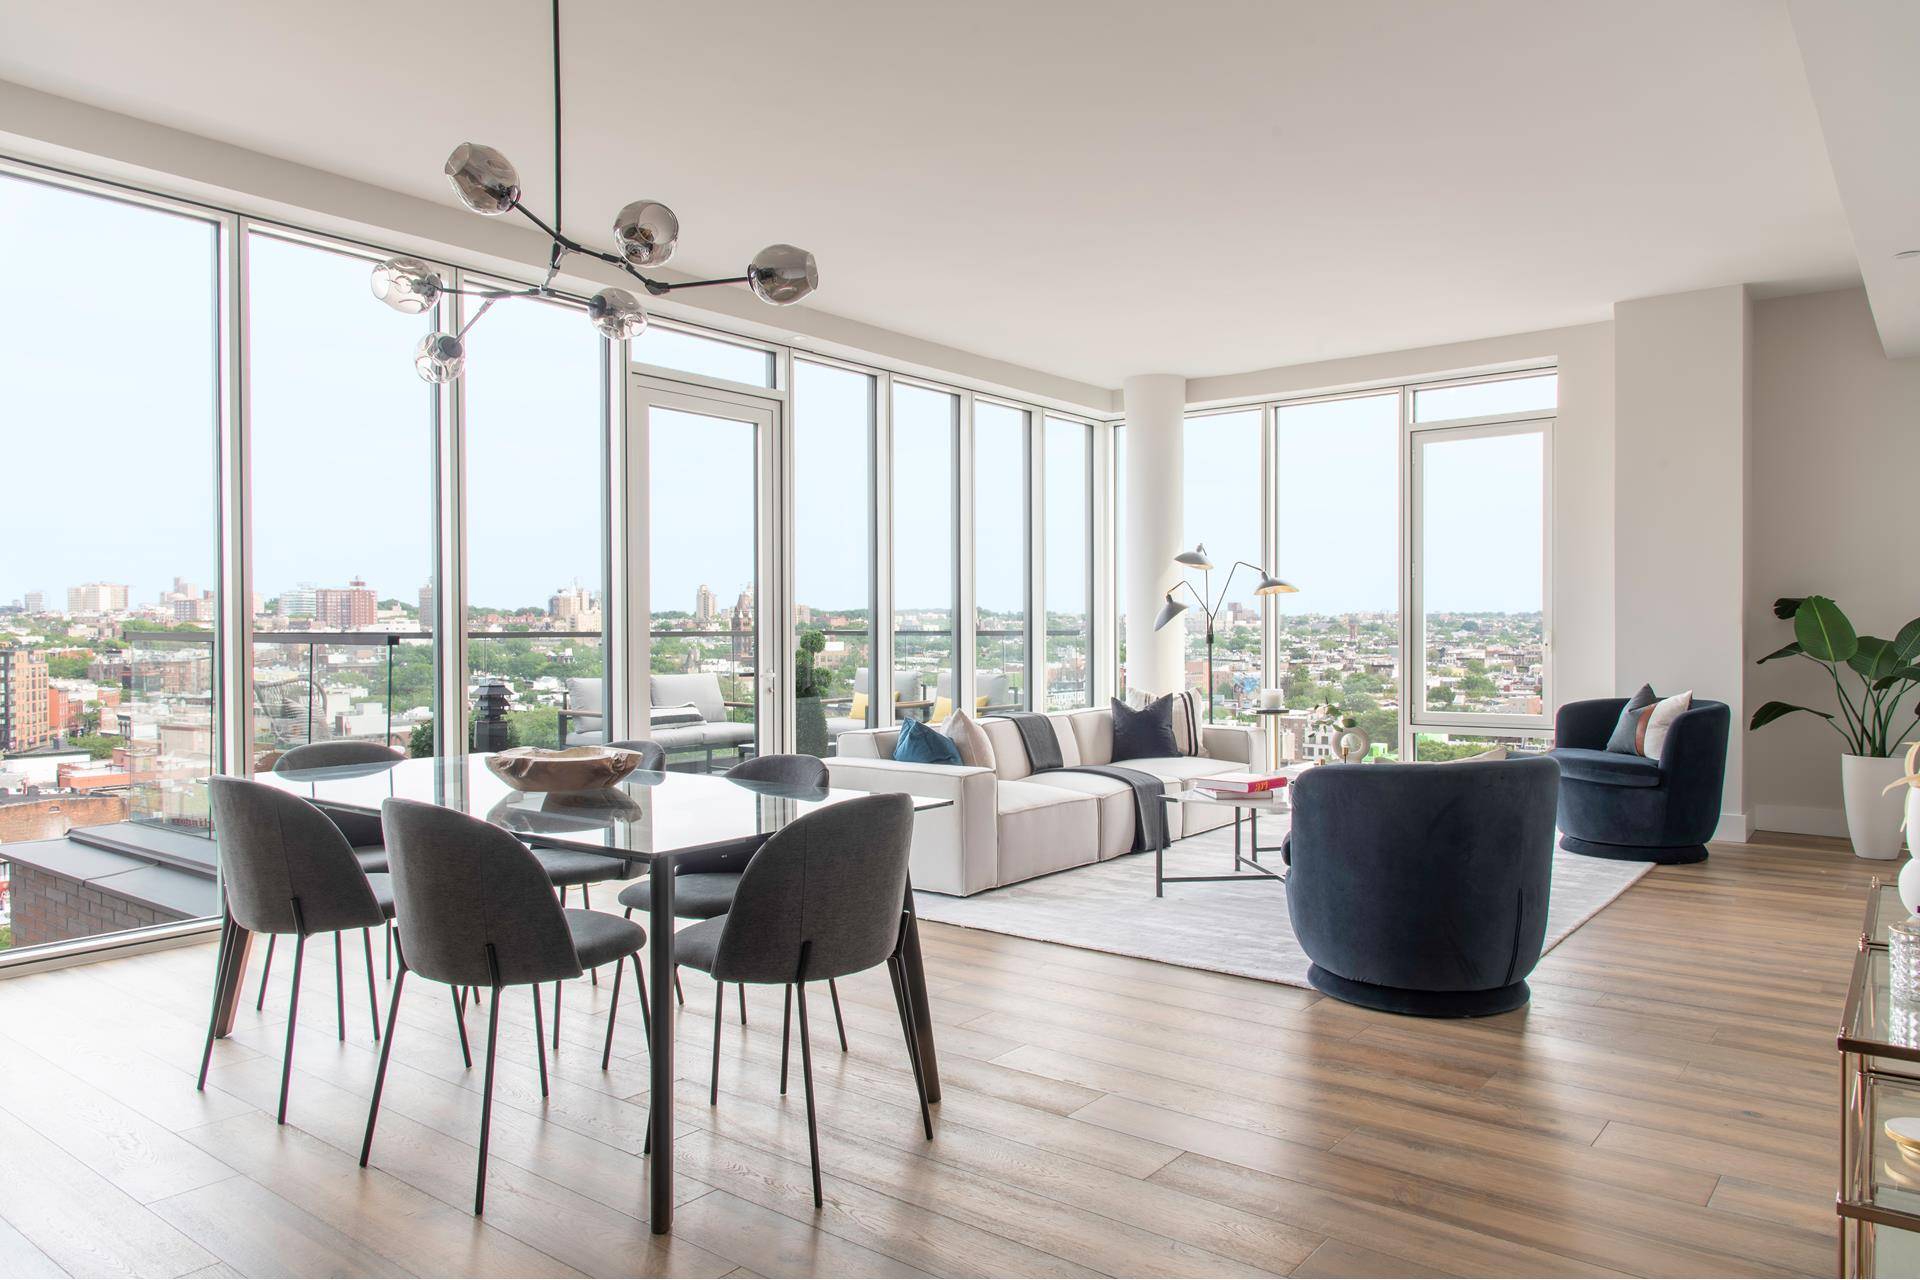 Penthouse 1202 is an impeccably designed and expansive 2, 021 square foot 3 bedroom, 2.